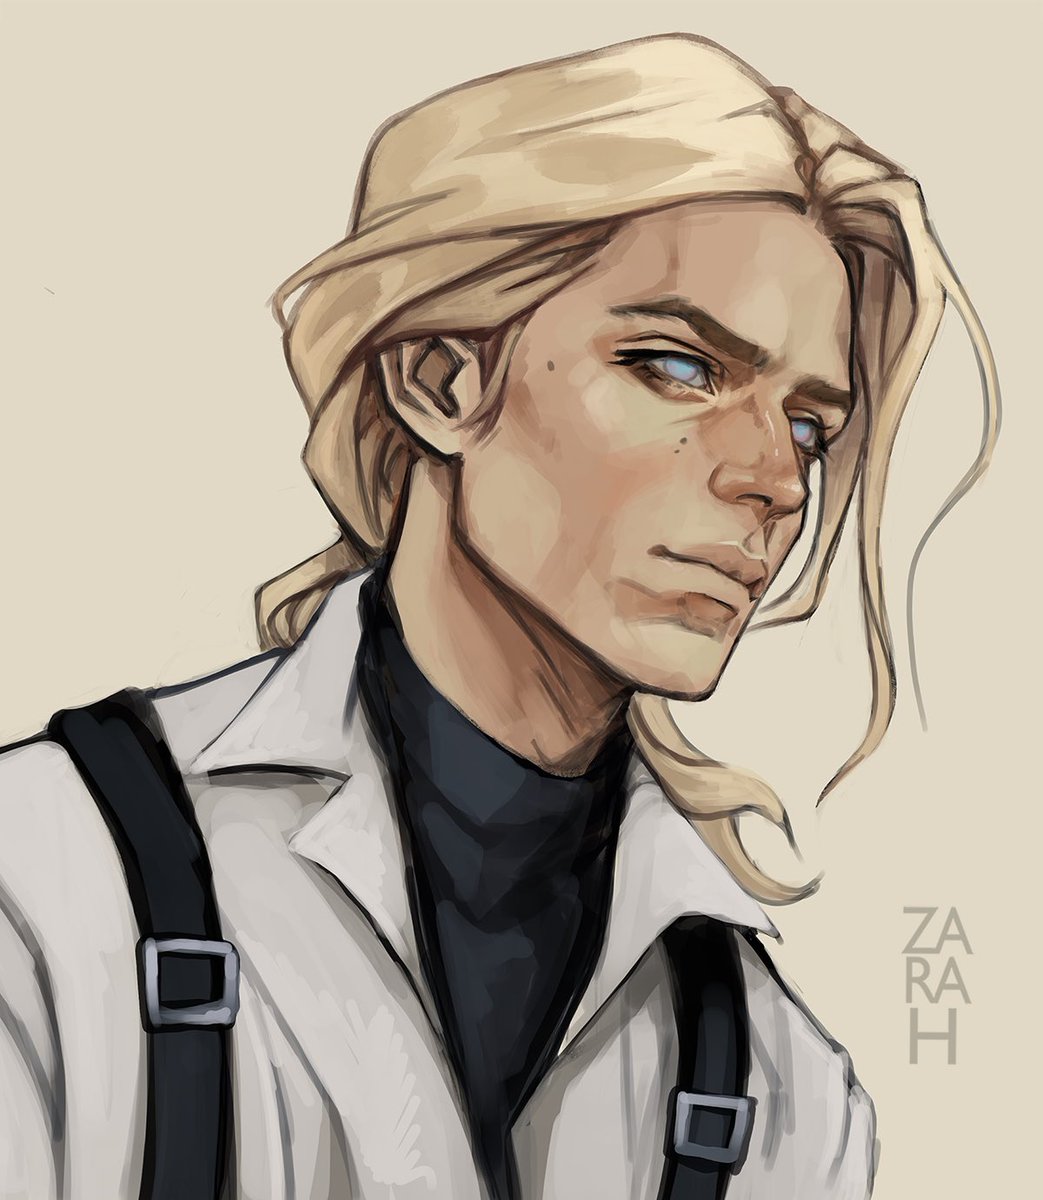 「Erik, a character from our 1940 VTM game」|Zara Hのイラスト